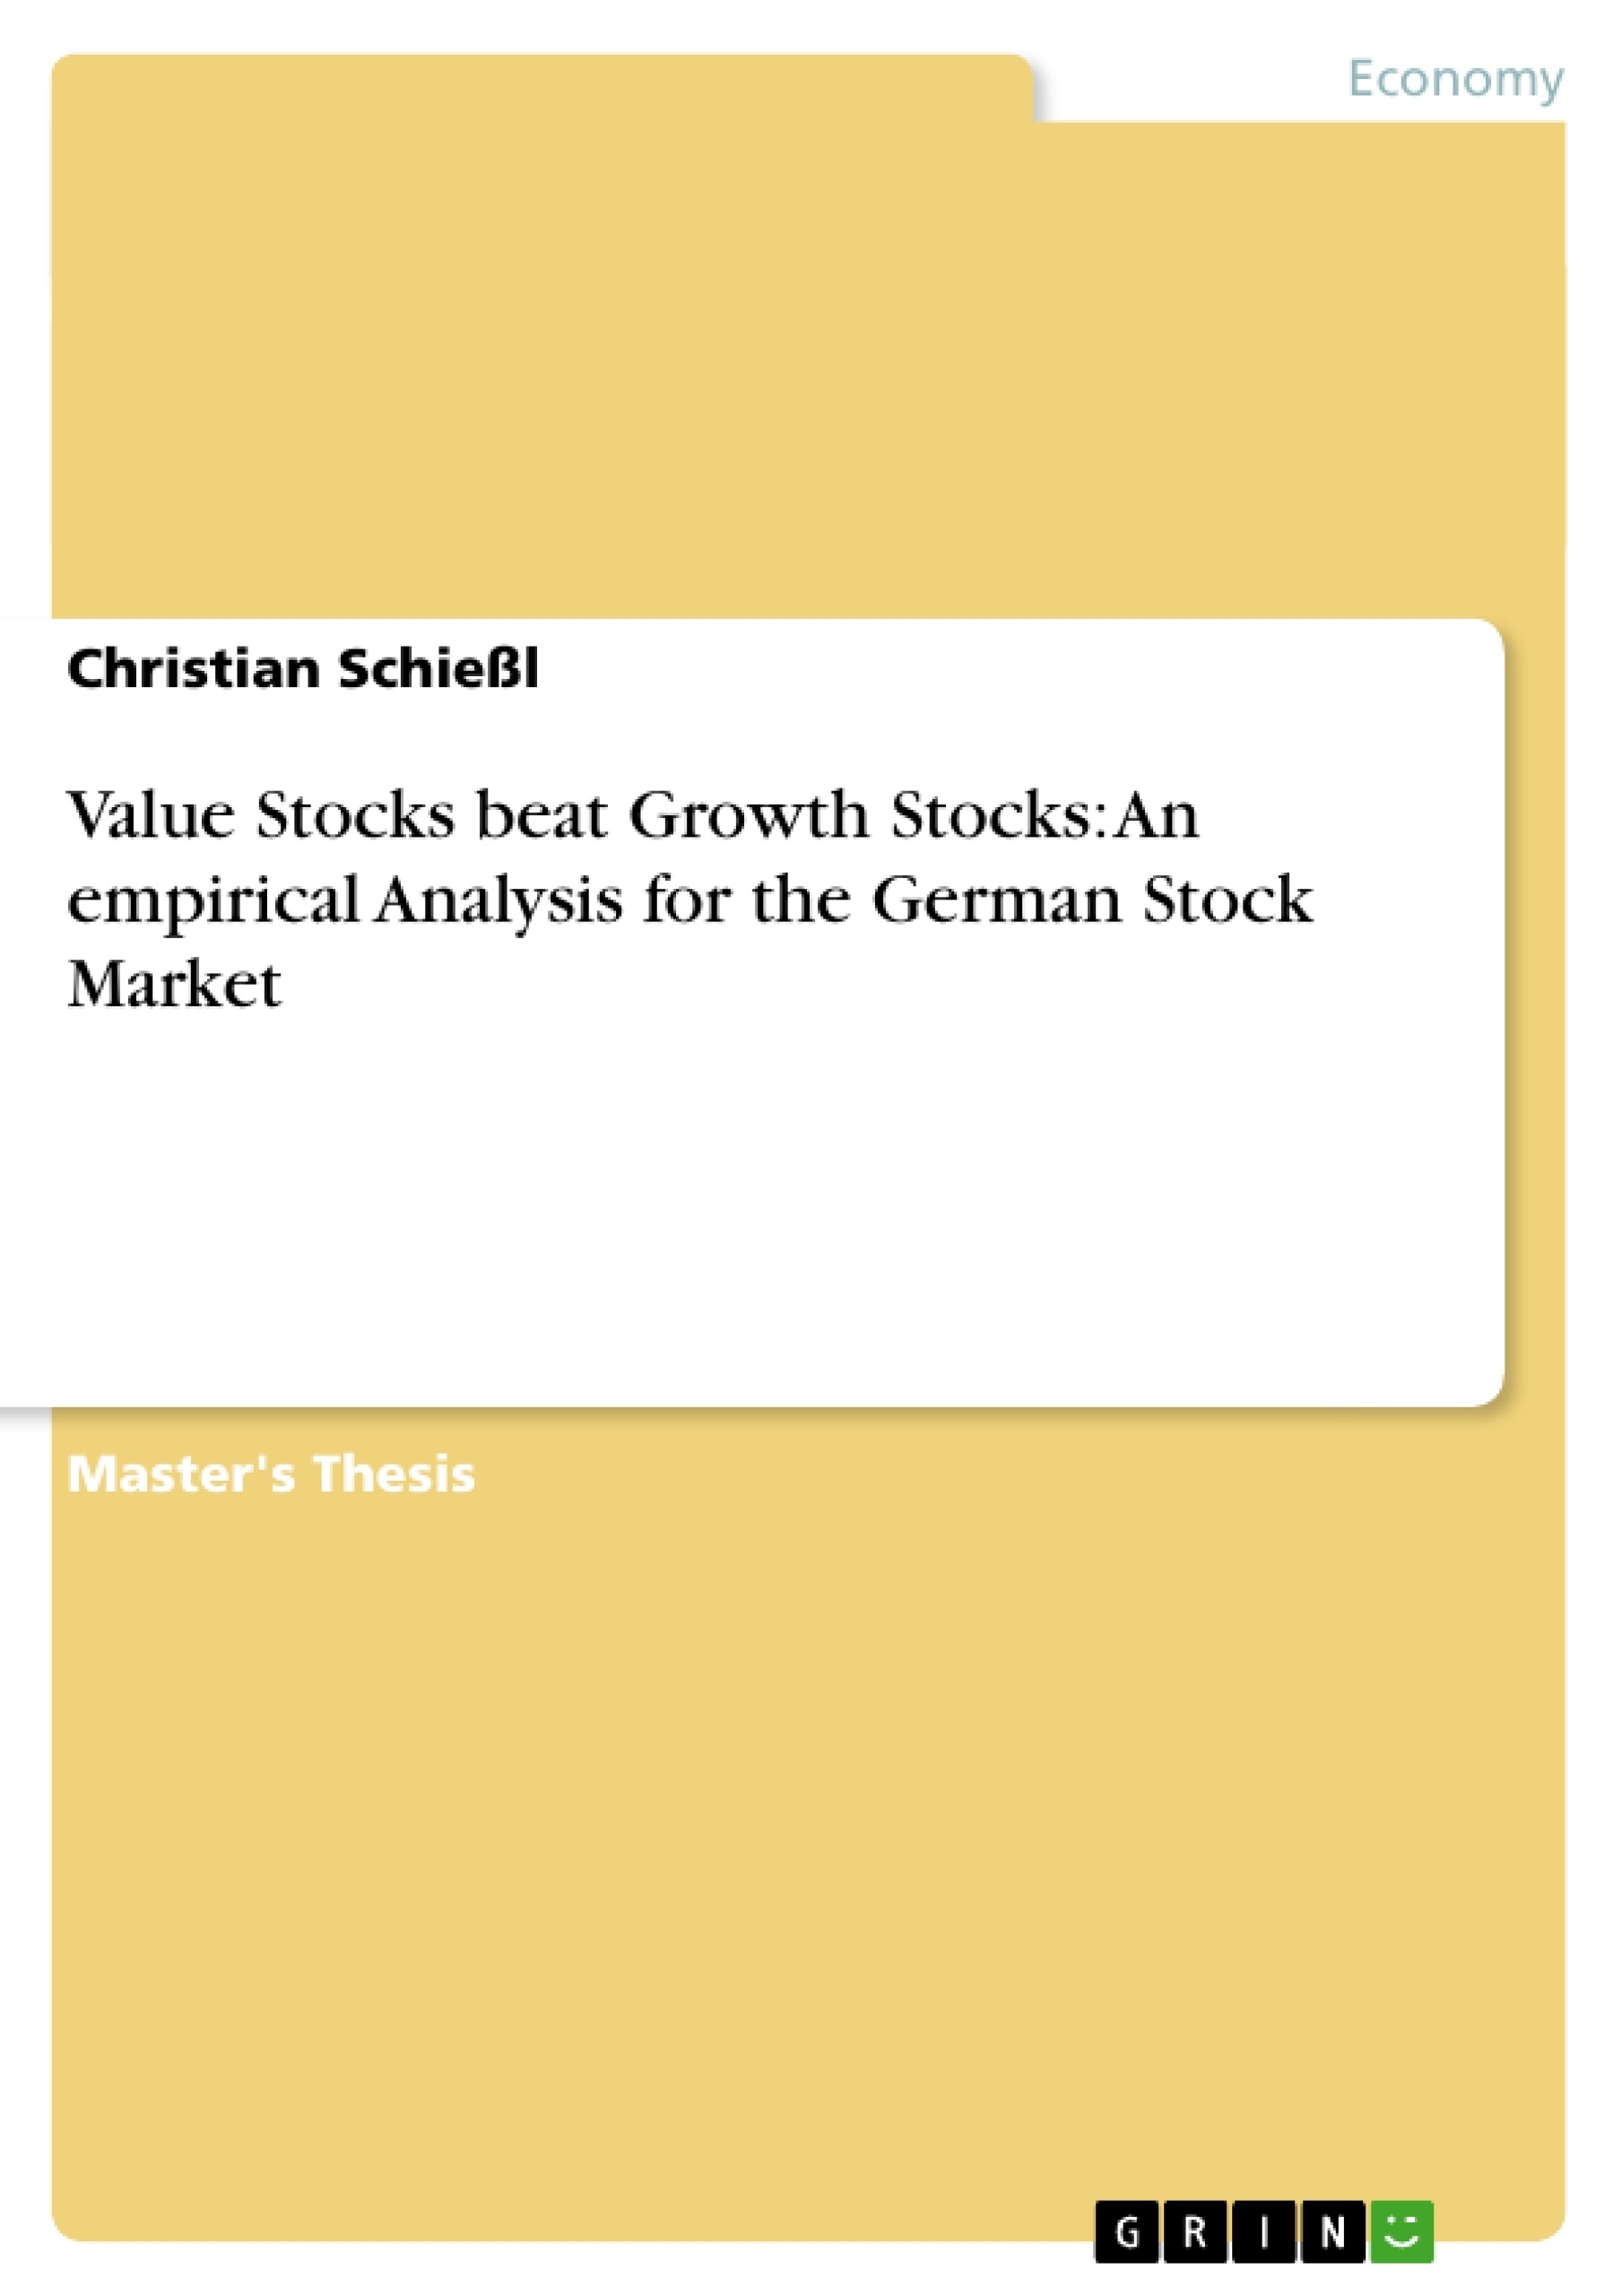 Title: Value Stocks beat Growth Stocks: An empirical Analysis for the German Stock Market